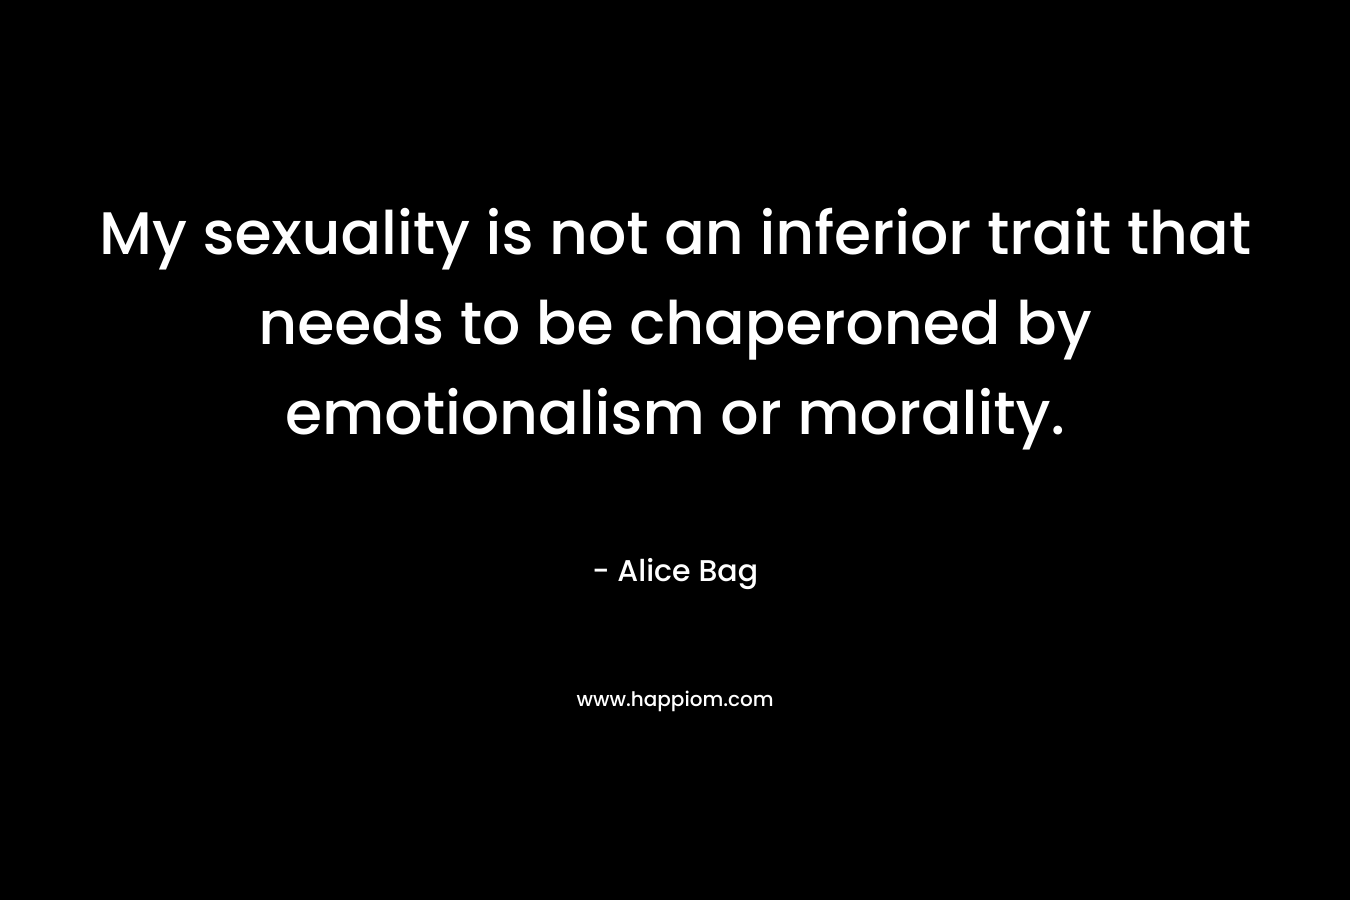 My sexuality is not an inferior trait that needs to be chaperoned by emotionalism or morality.